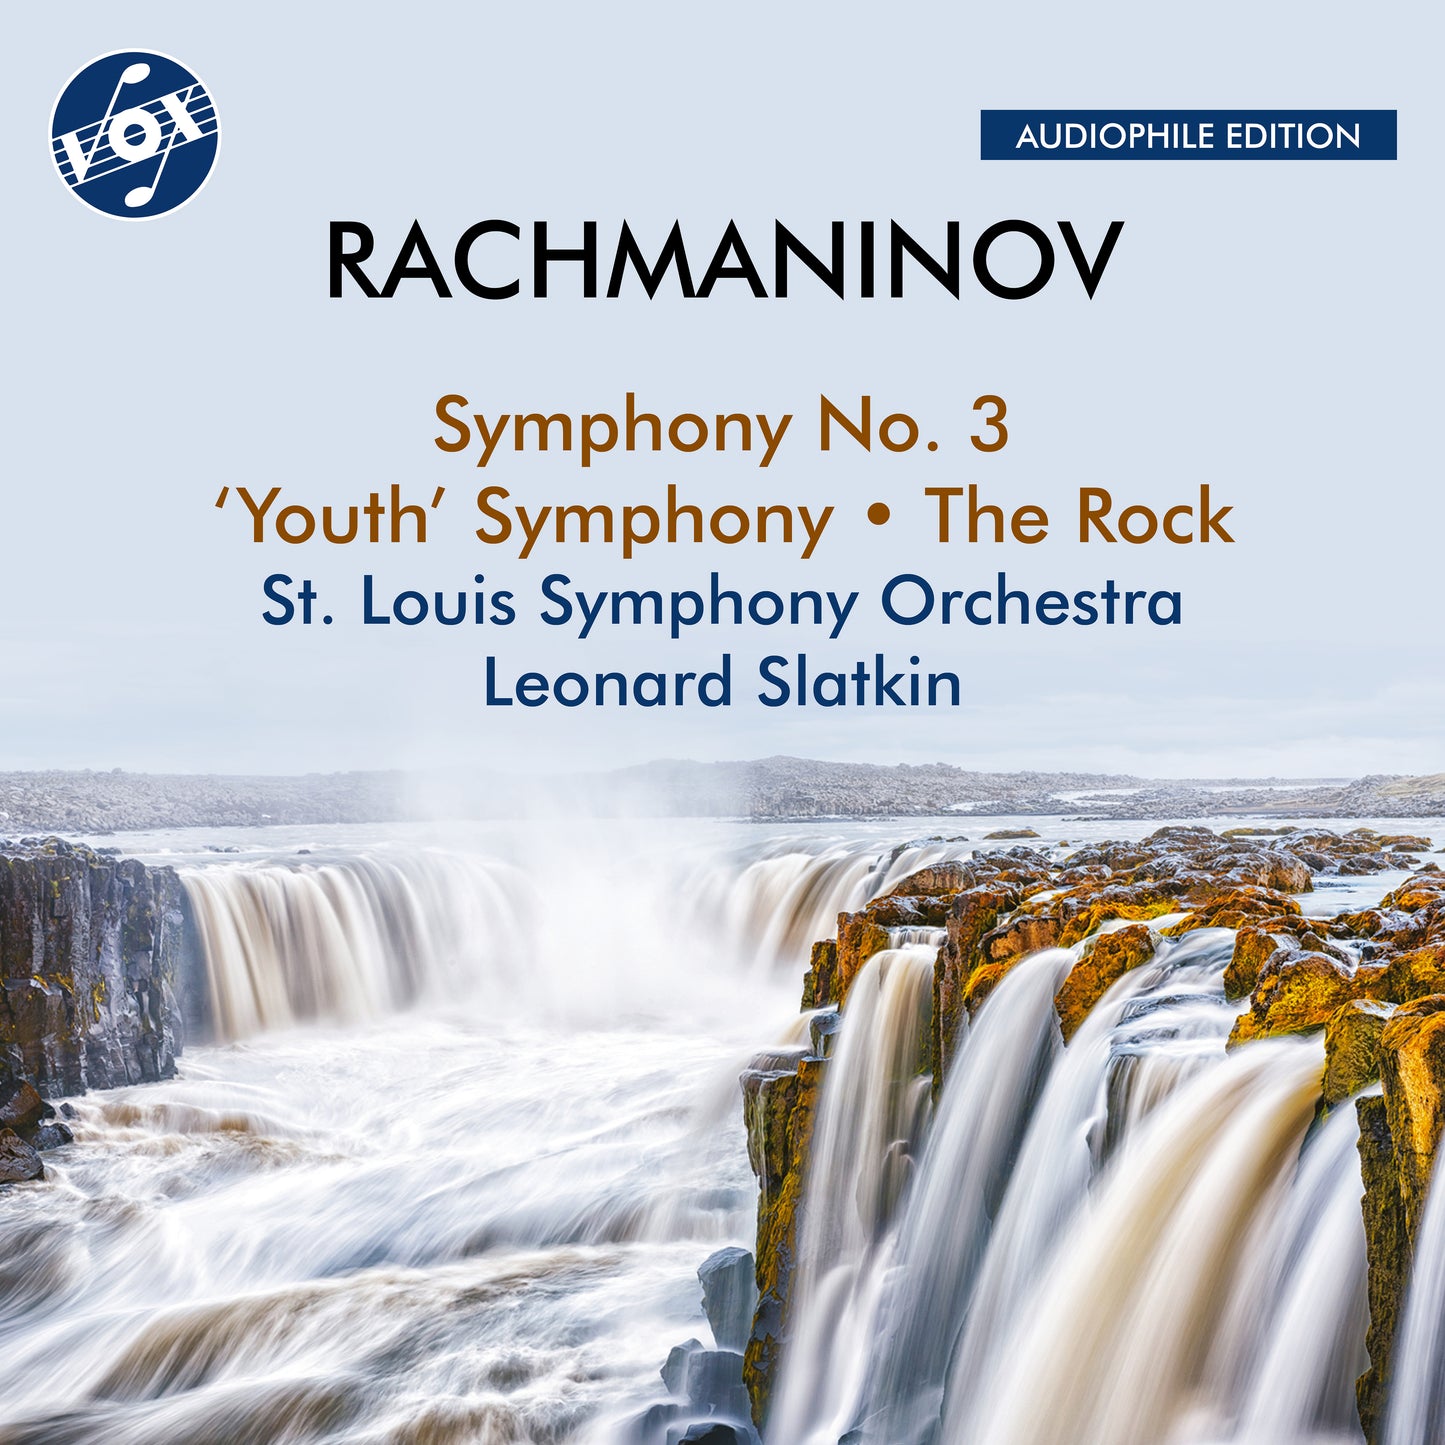 Rachmaninoff: Symphony No. 3 in A Minor, Op. 44; Youth Symph